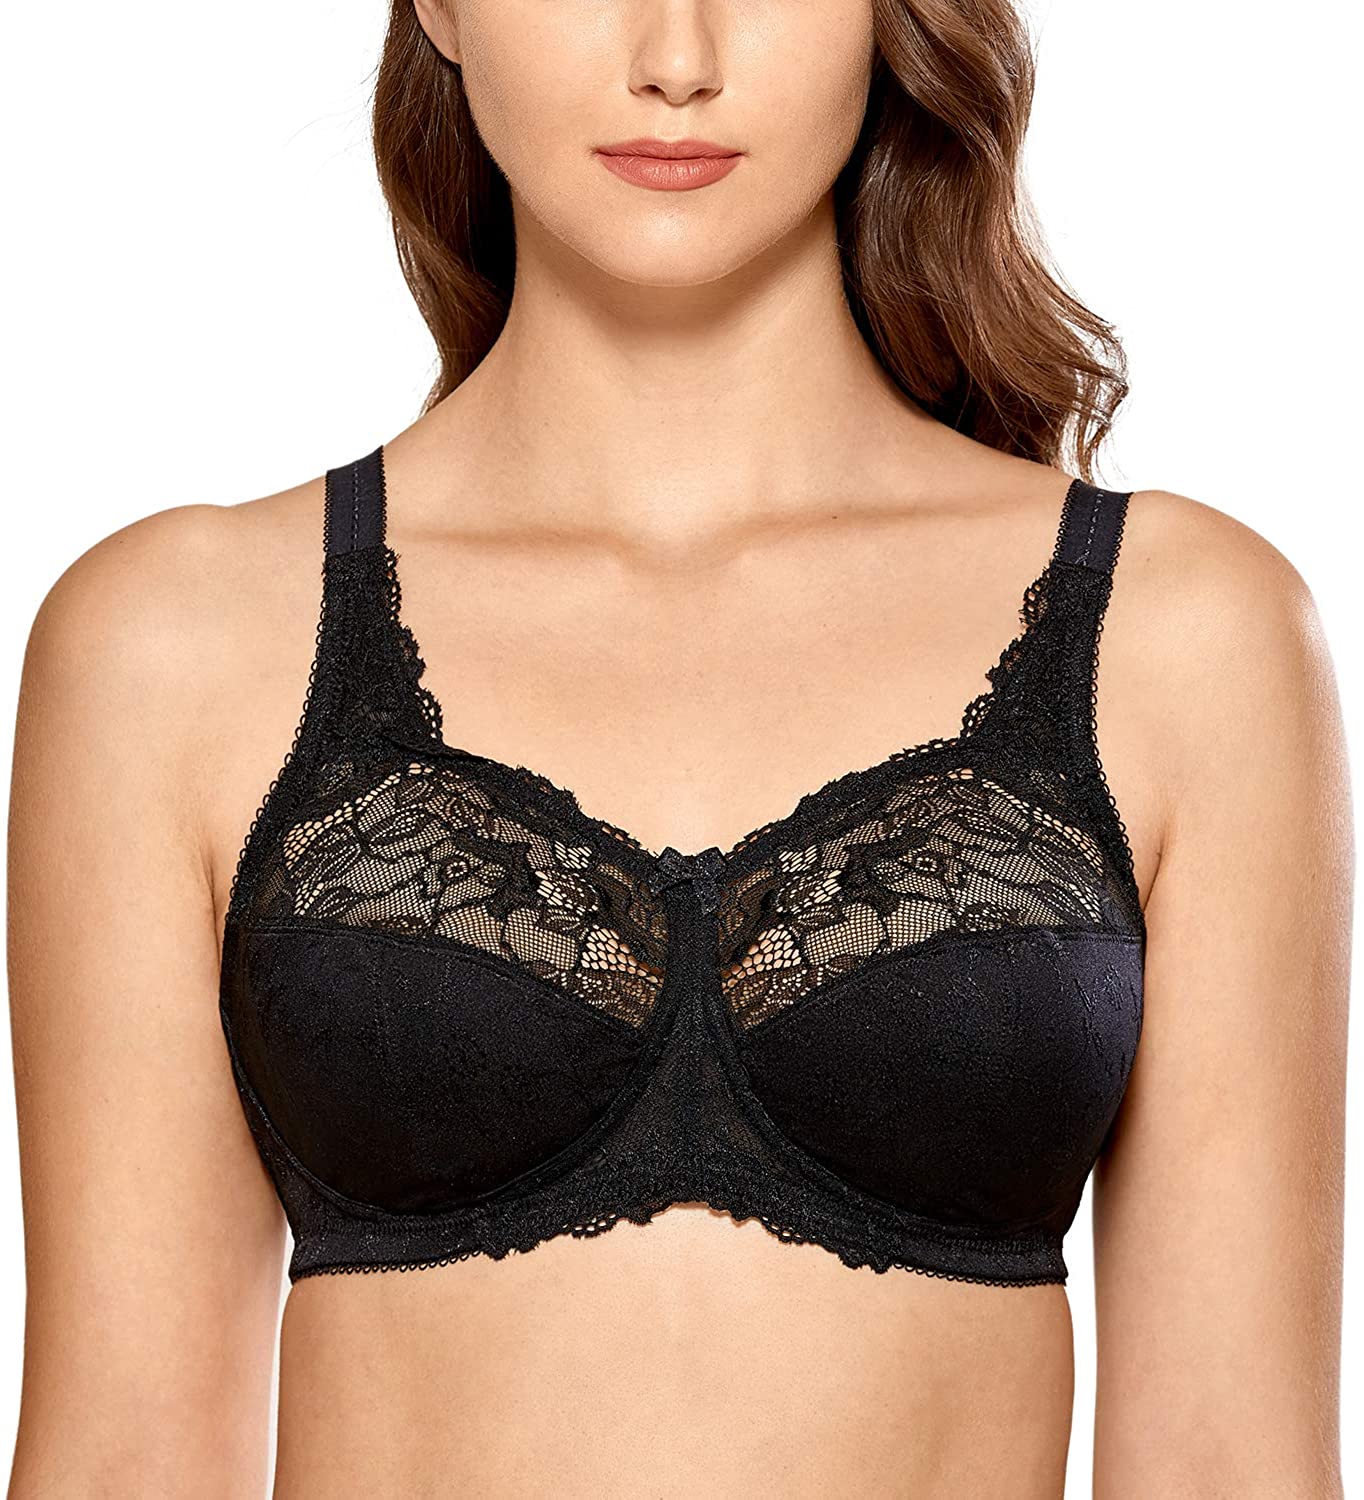  DELIMIRA Womens Wireless Plus Size Lace Bra Unlined Full  Coverage Comfort Cotton Smoke Fills The Air